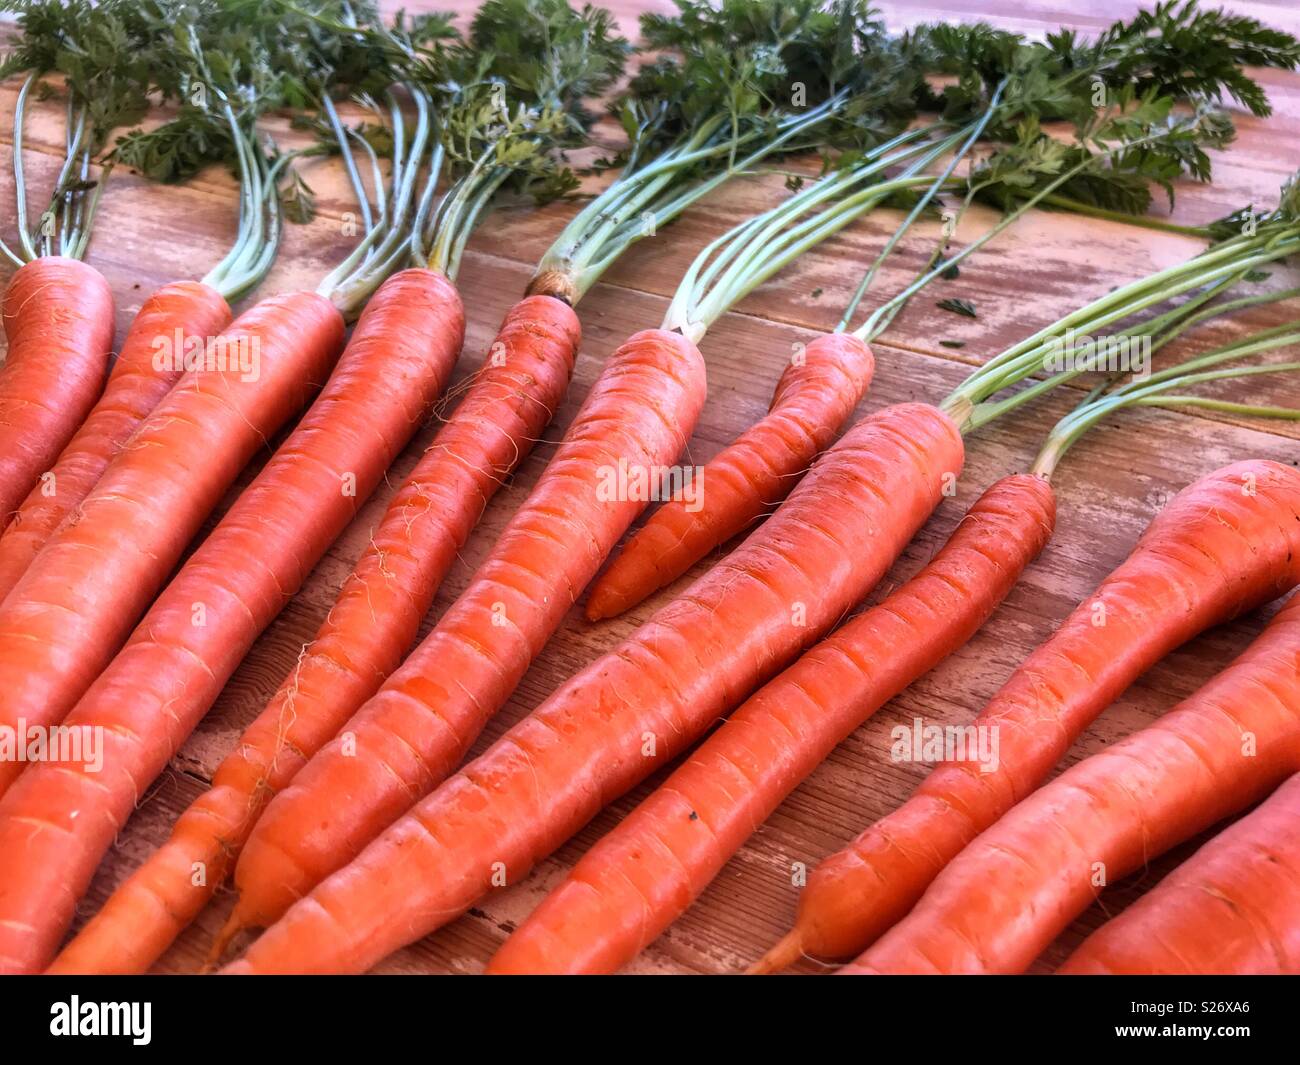 Fresh produce, Organic carrots with carrot greens, high angle view Stock Photo